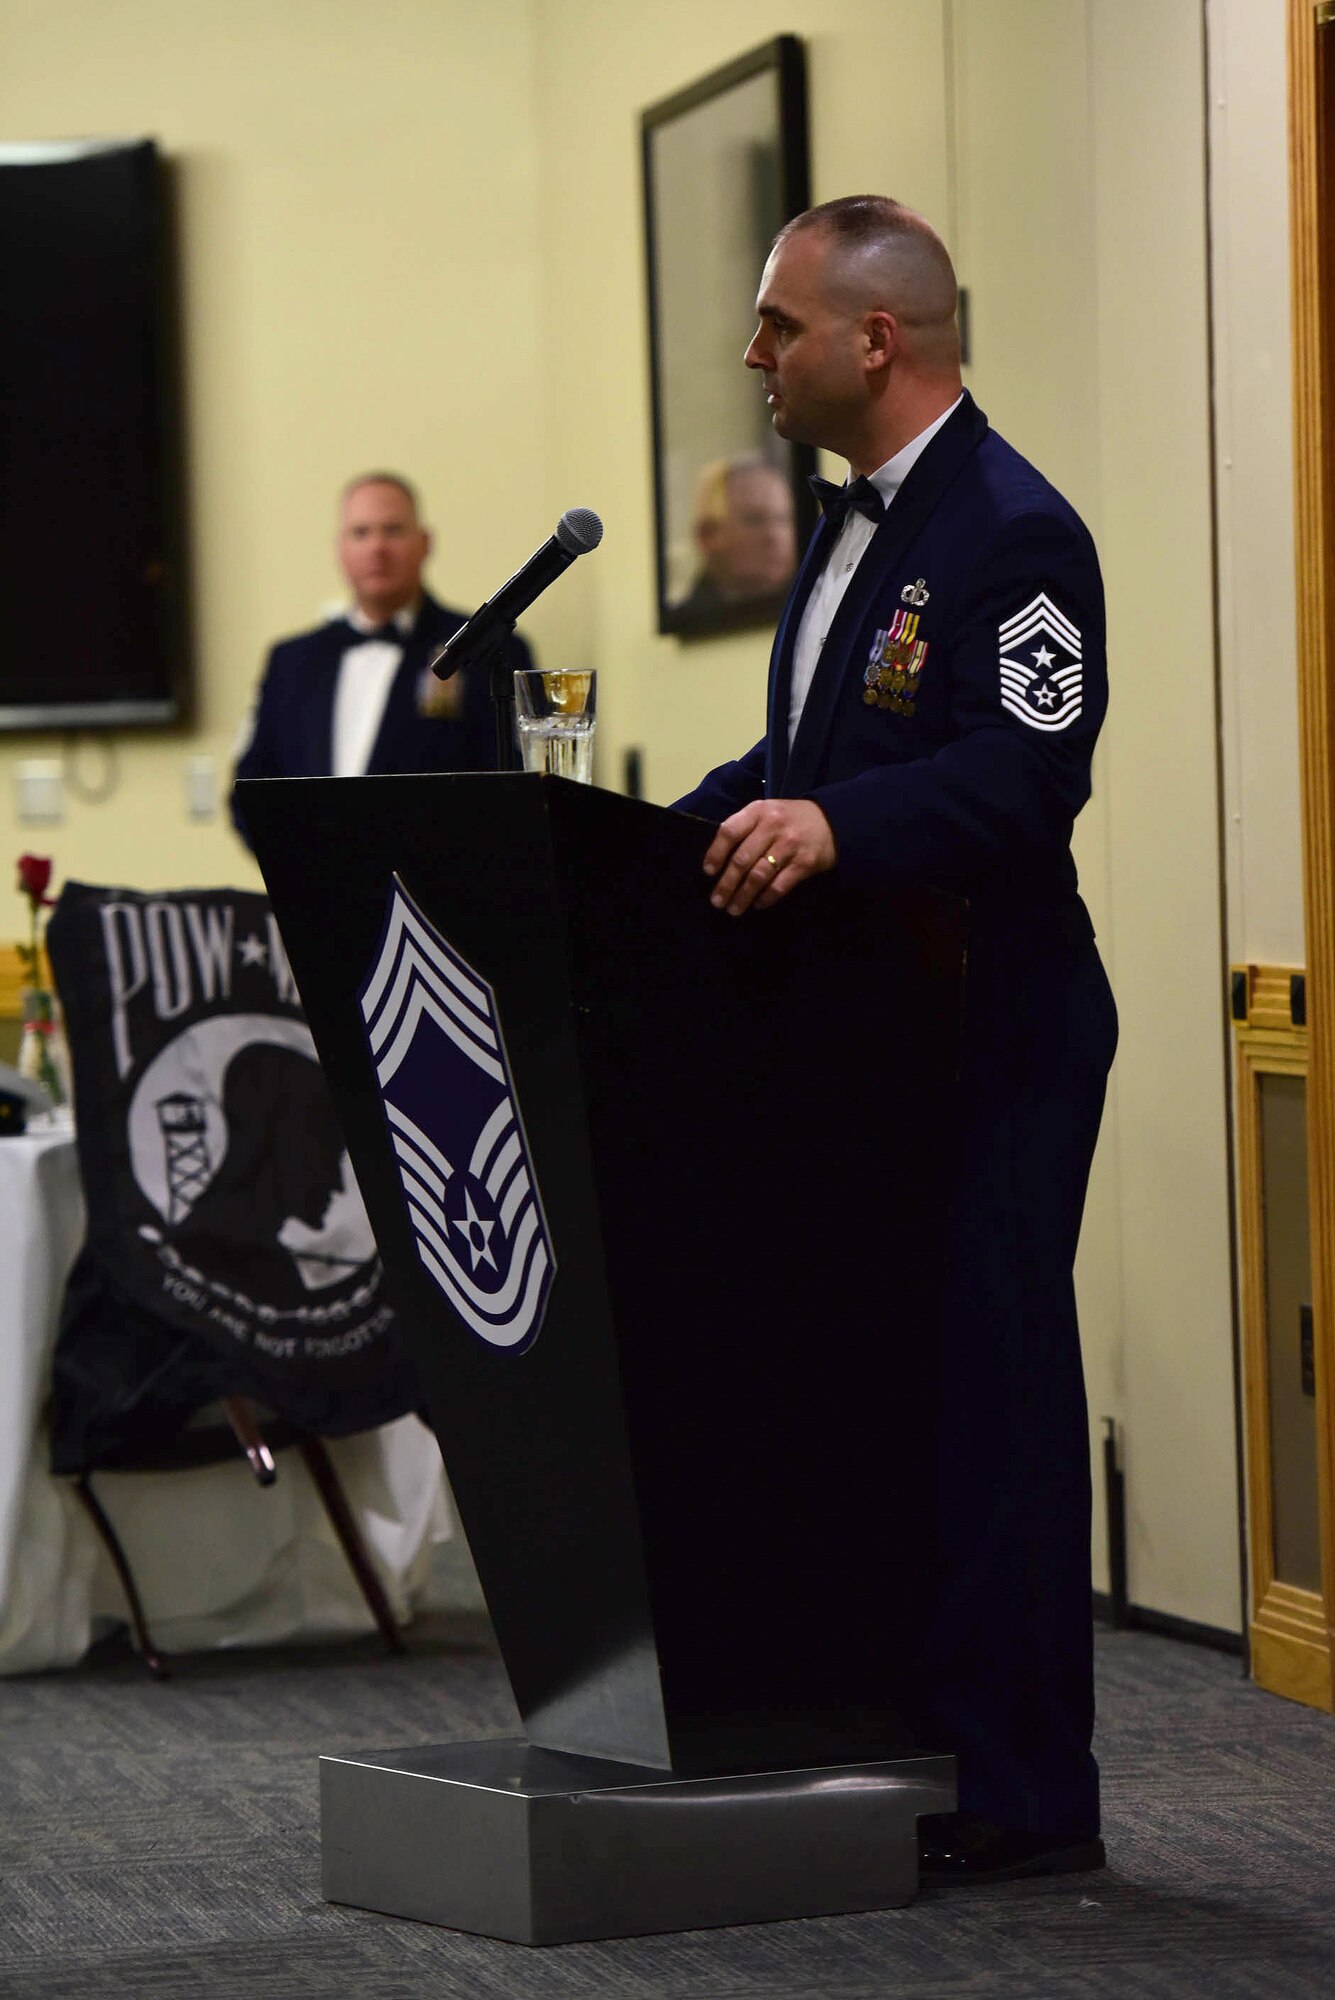 U.S. Air Force Chief Master Sgt. James Lyda, the 509th Bomb Wing command chief, speaks during the 2018 Chief Induction Ceremony at Whiteman Air Force Base, Mo., March 16, 2018.